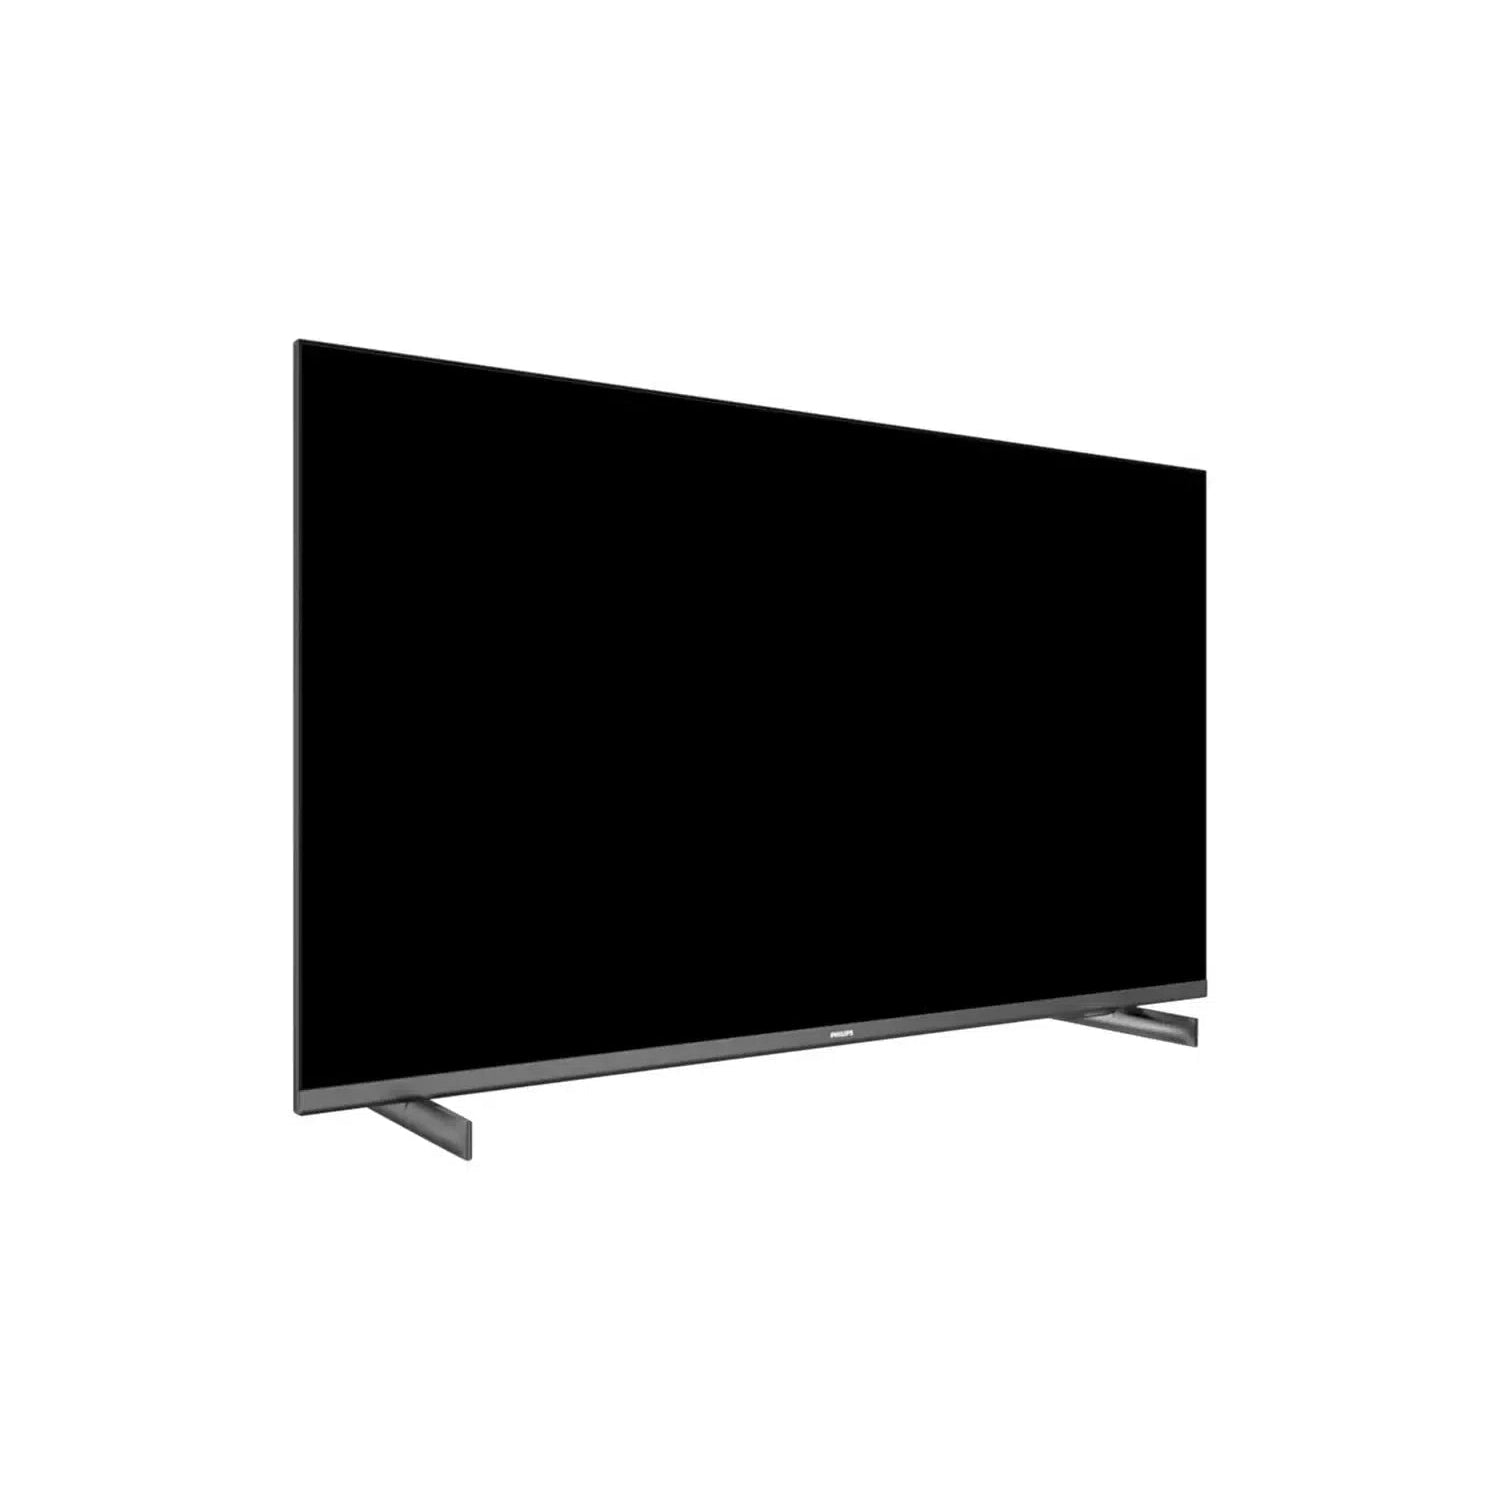 Refurbished Philips 50 Inch 50PUS7506 Smart 4K UHD HDR LED Freeview TV (No Stand)